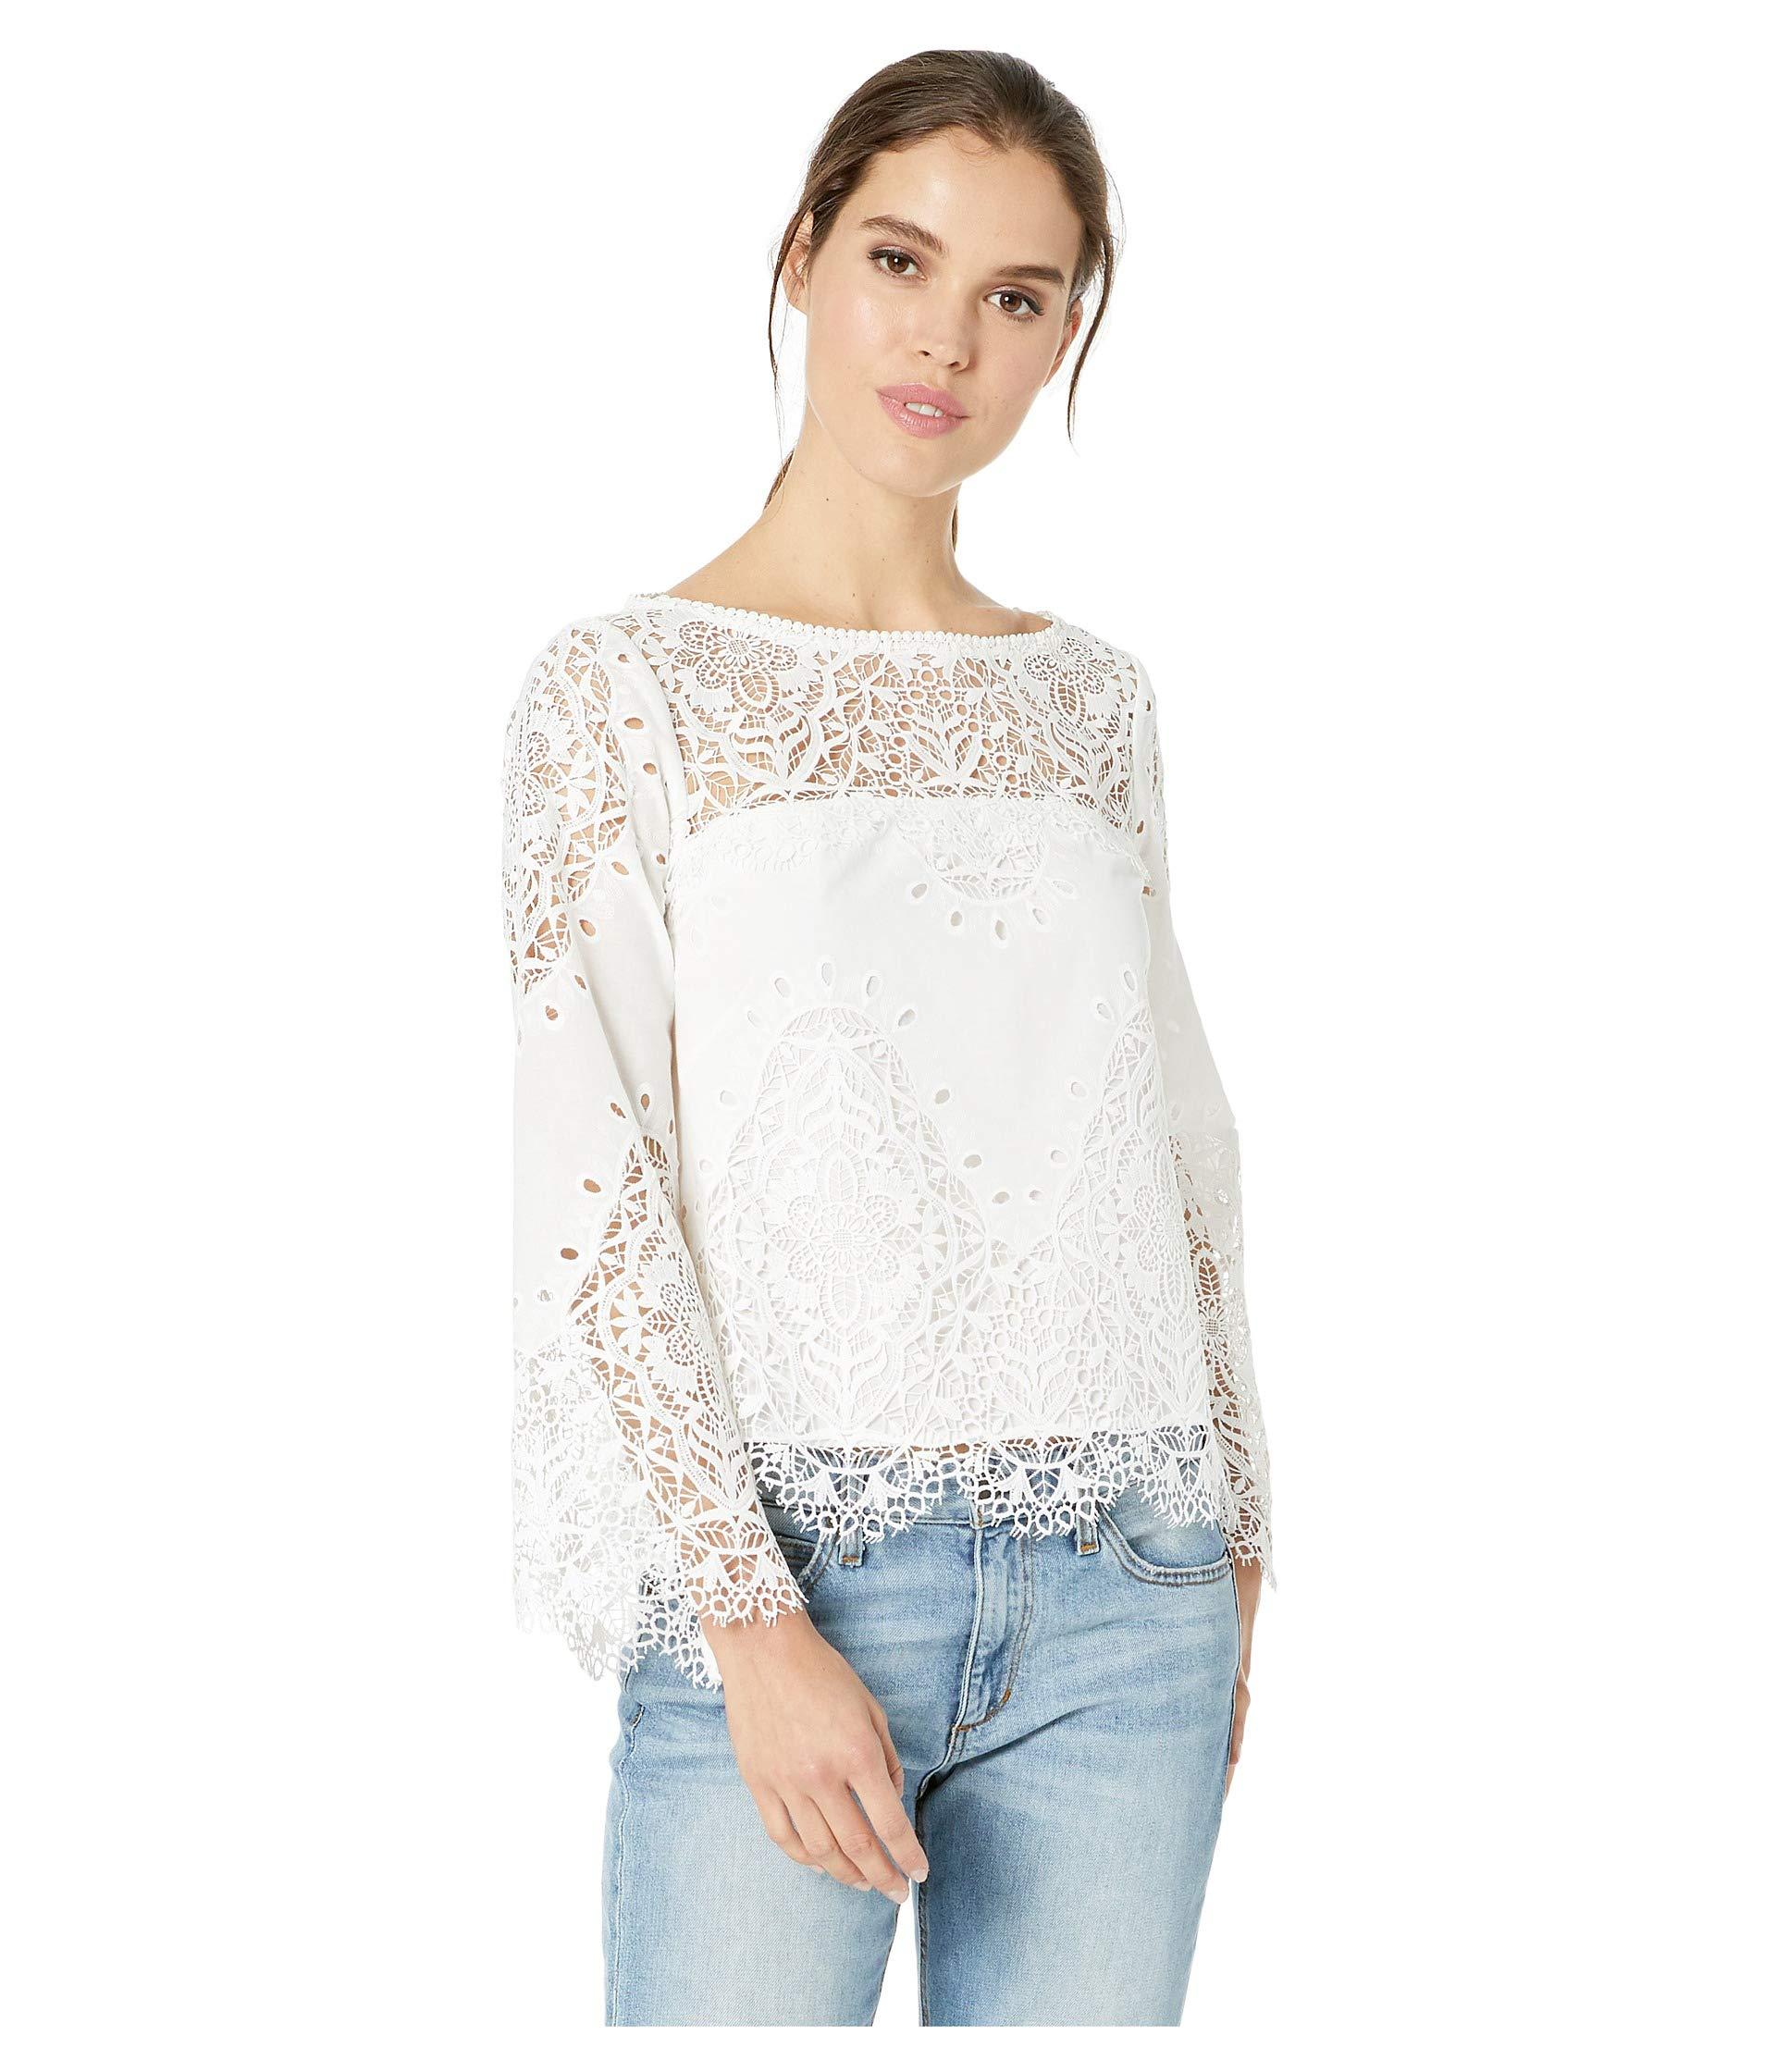 Nanette Lepore Cotton Lacey Top in White - Lyst